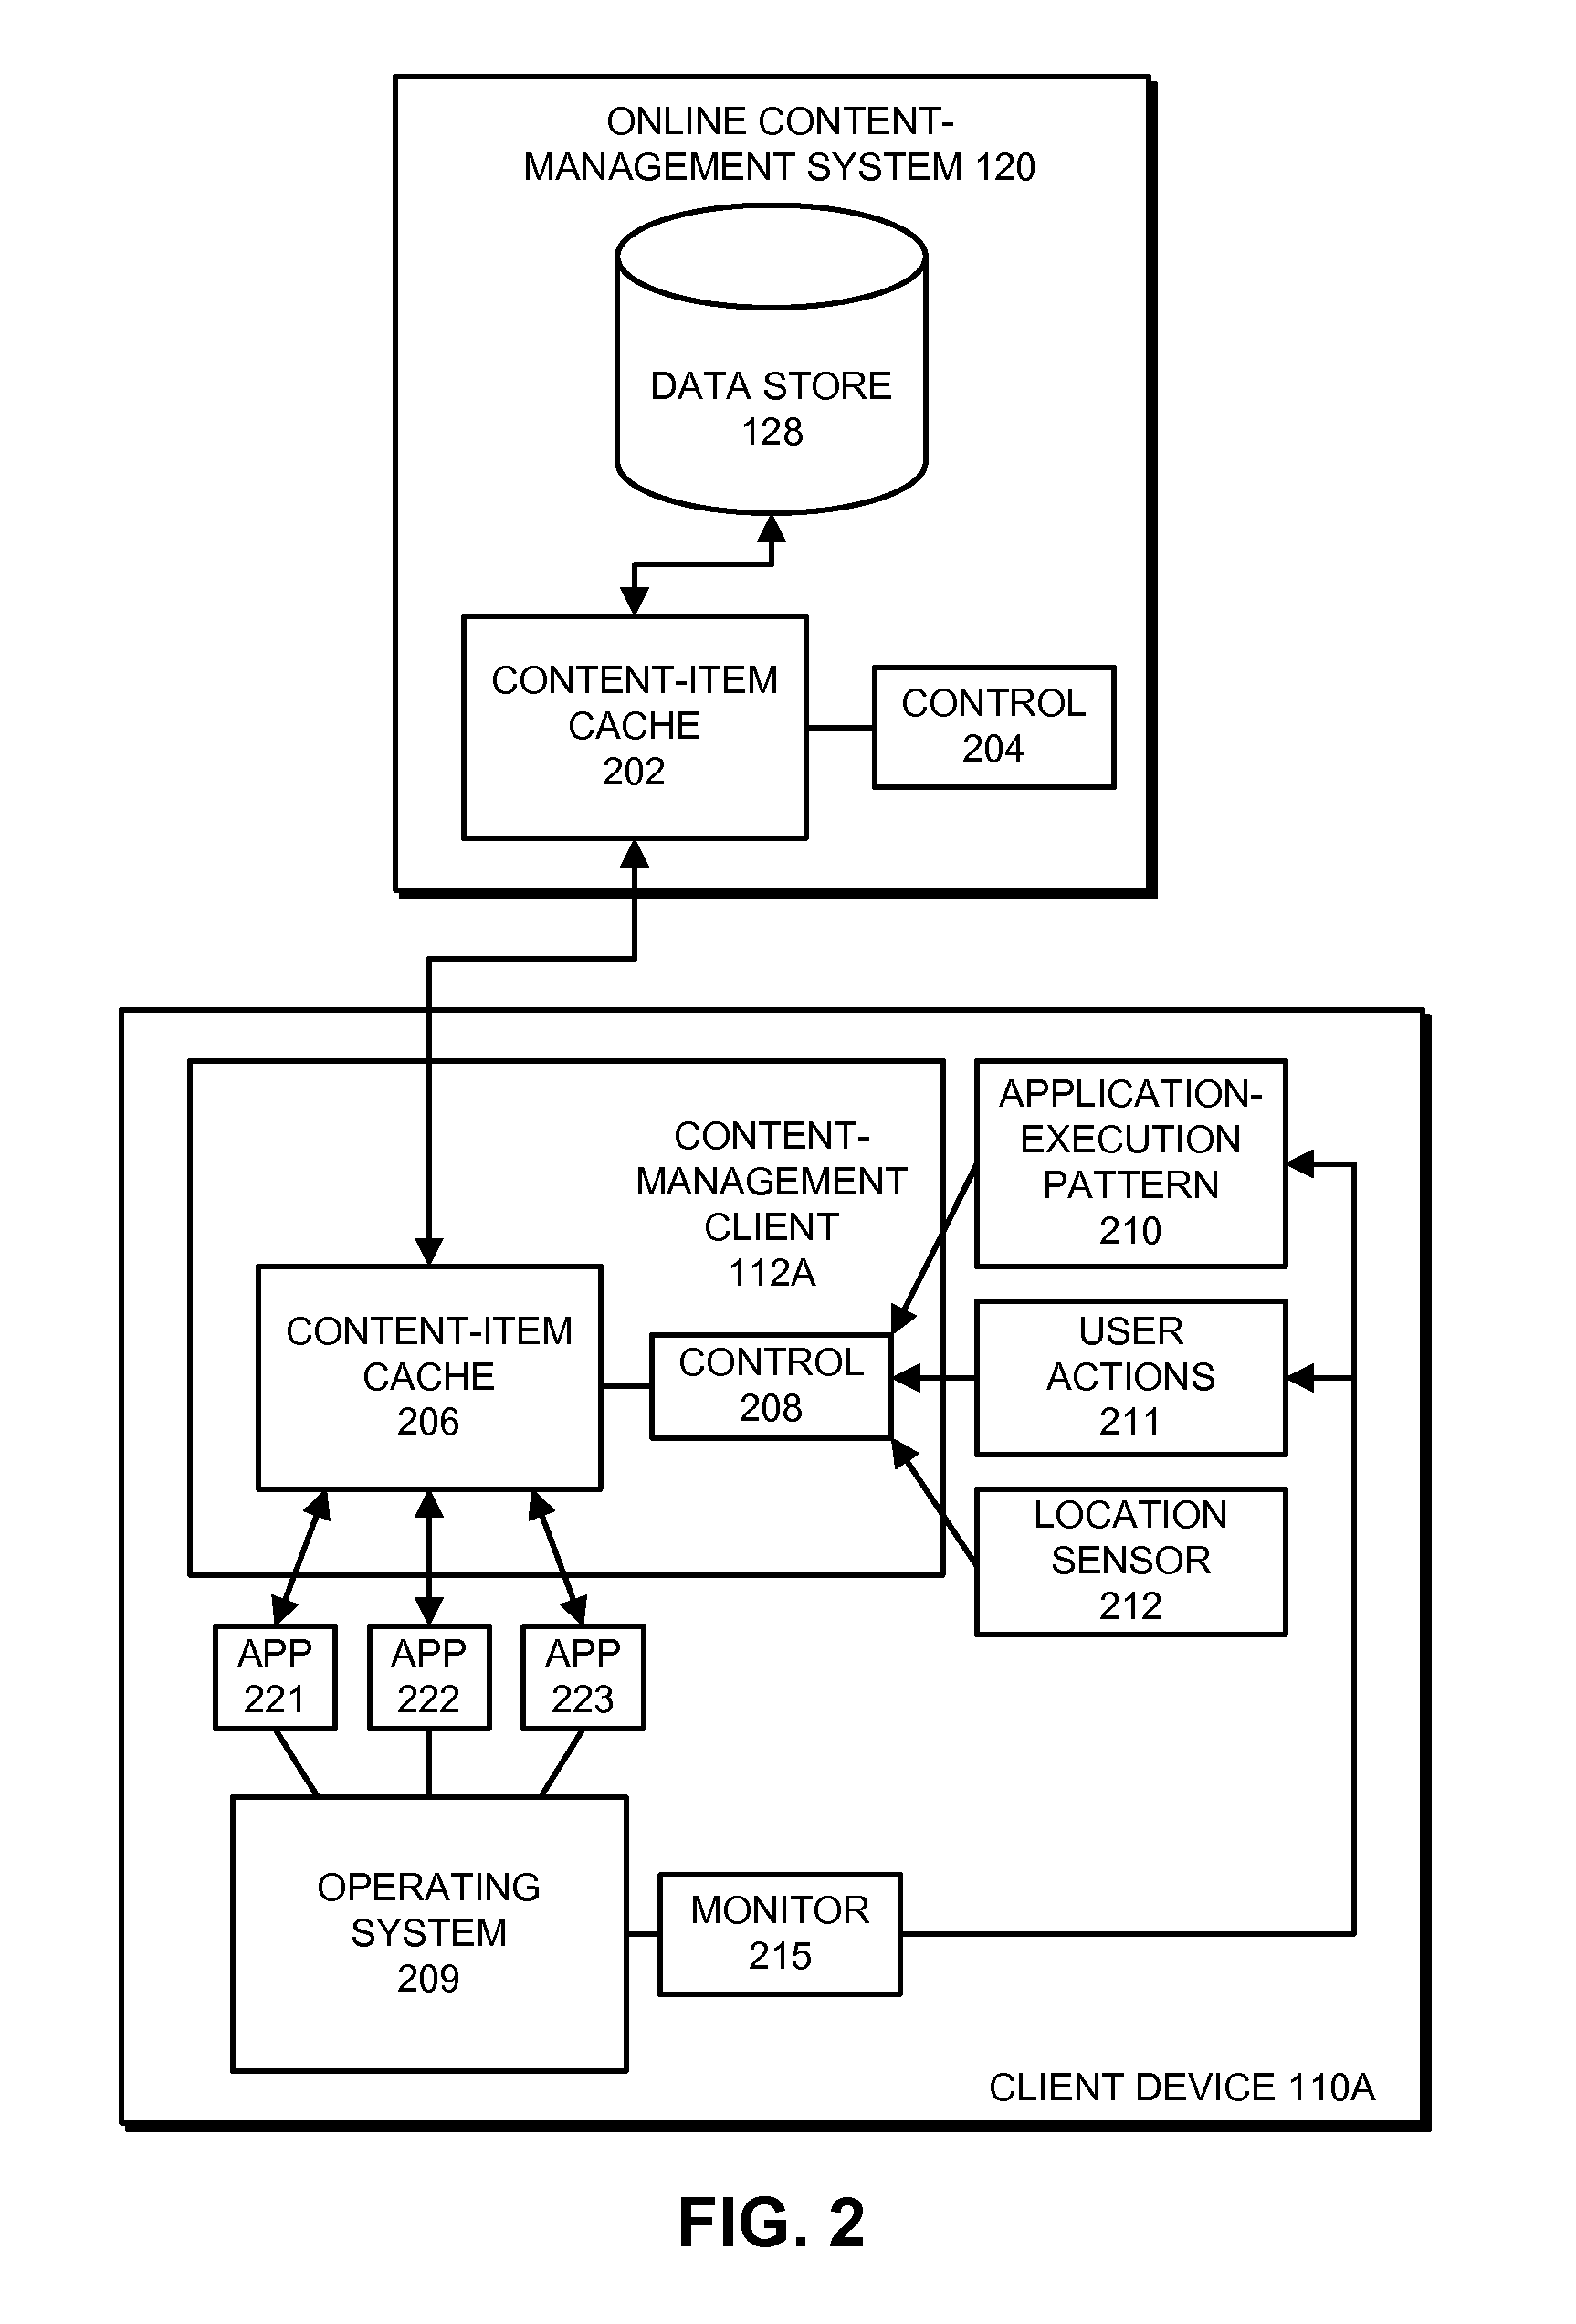 Managing a local cache for an online content-management system